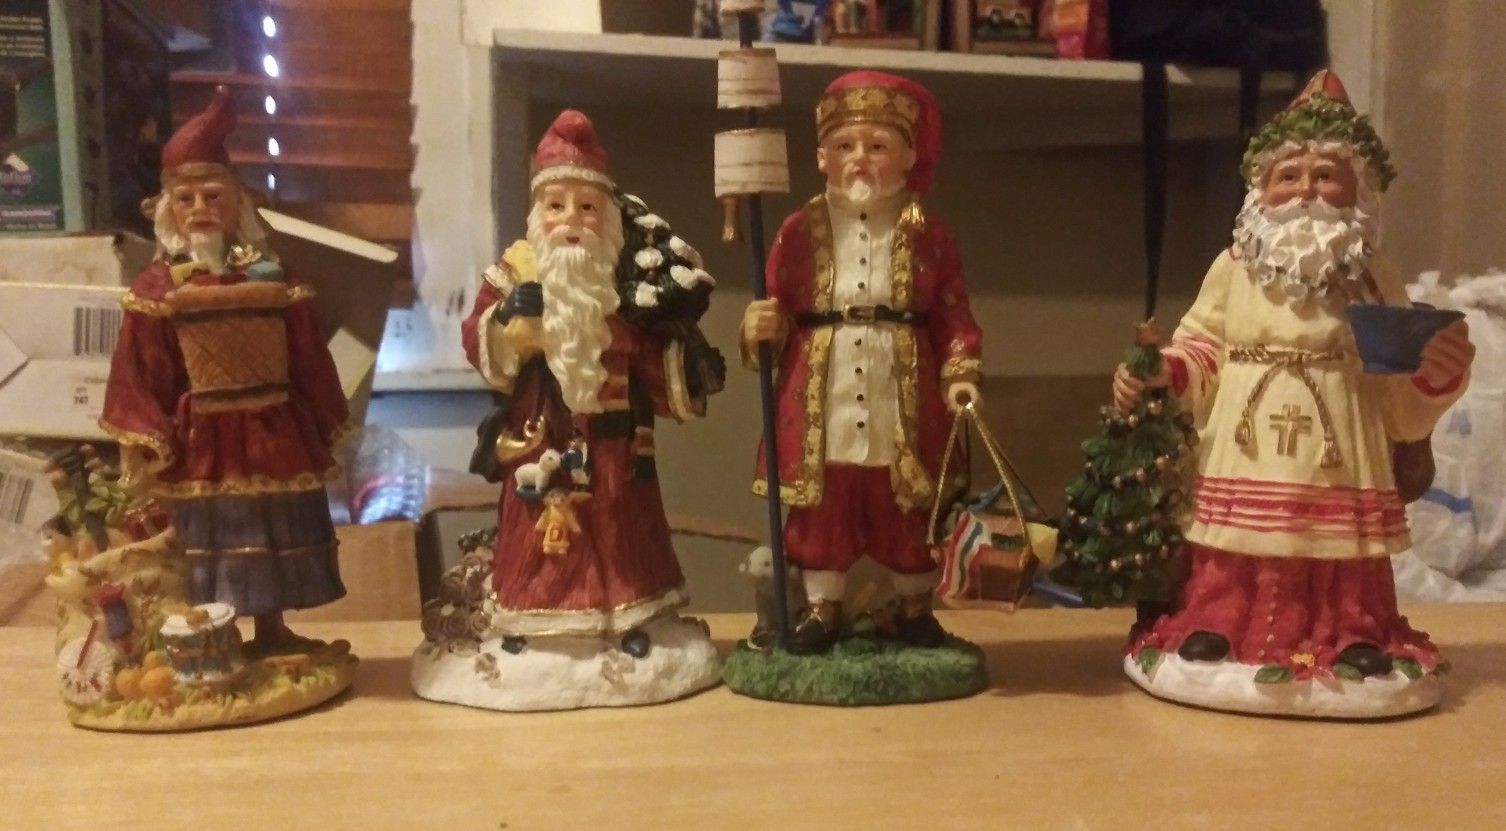 The international santa claus collection